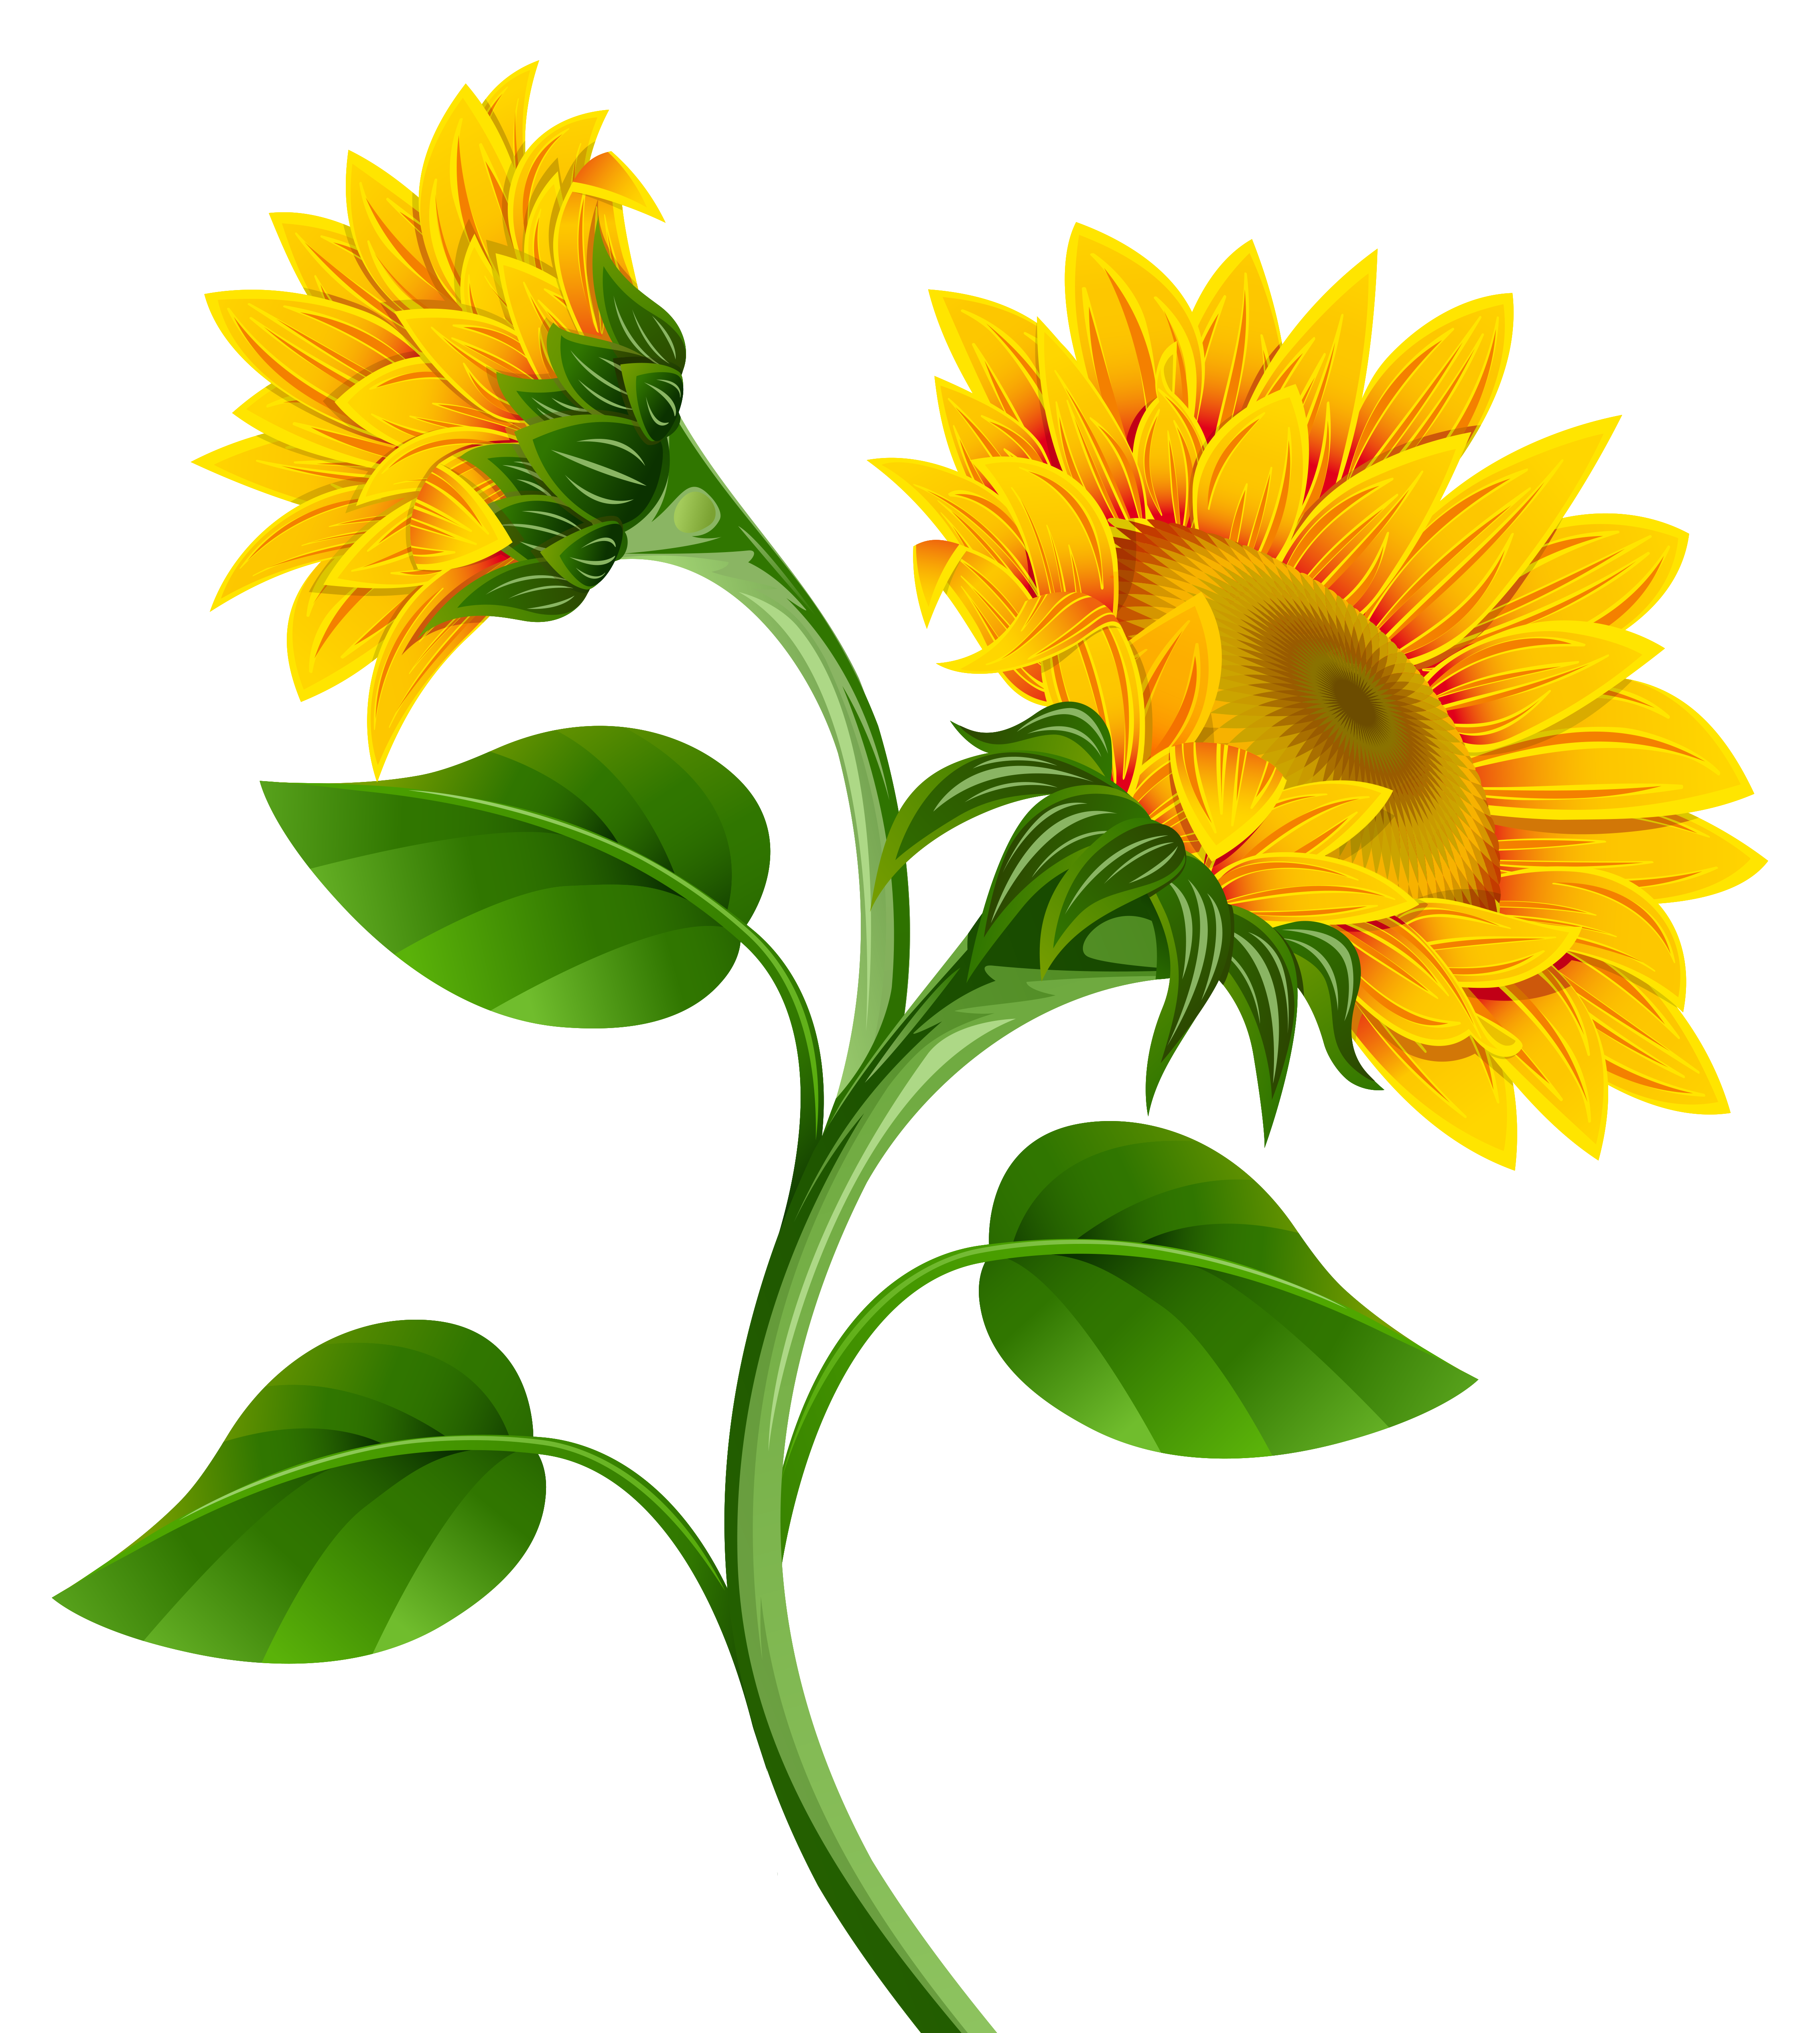 Sunflowers PNG Clipart Image.